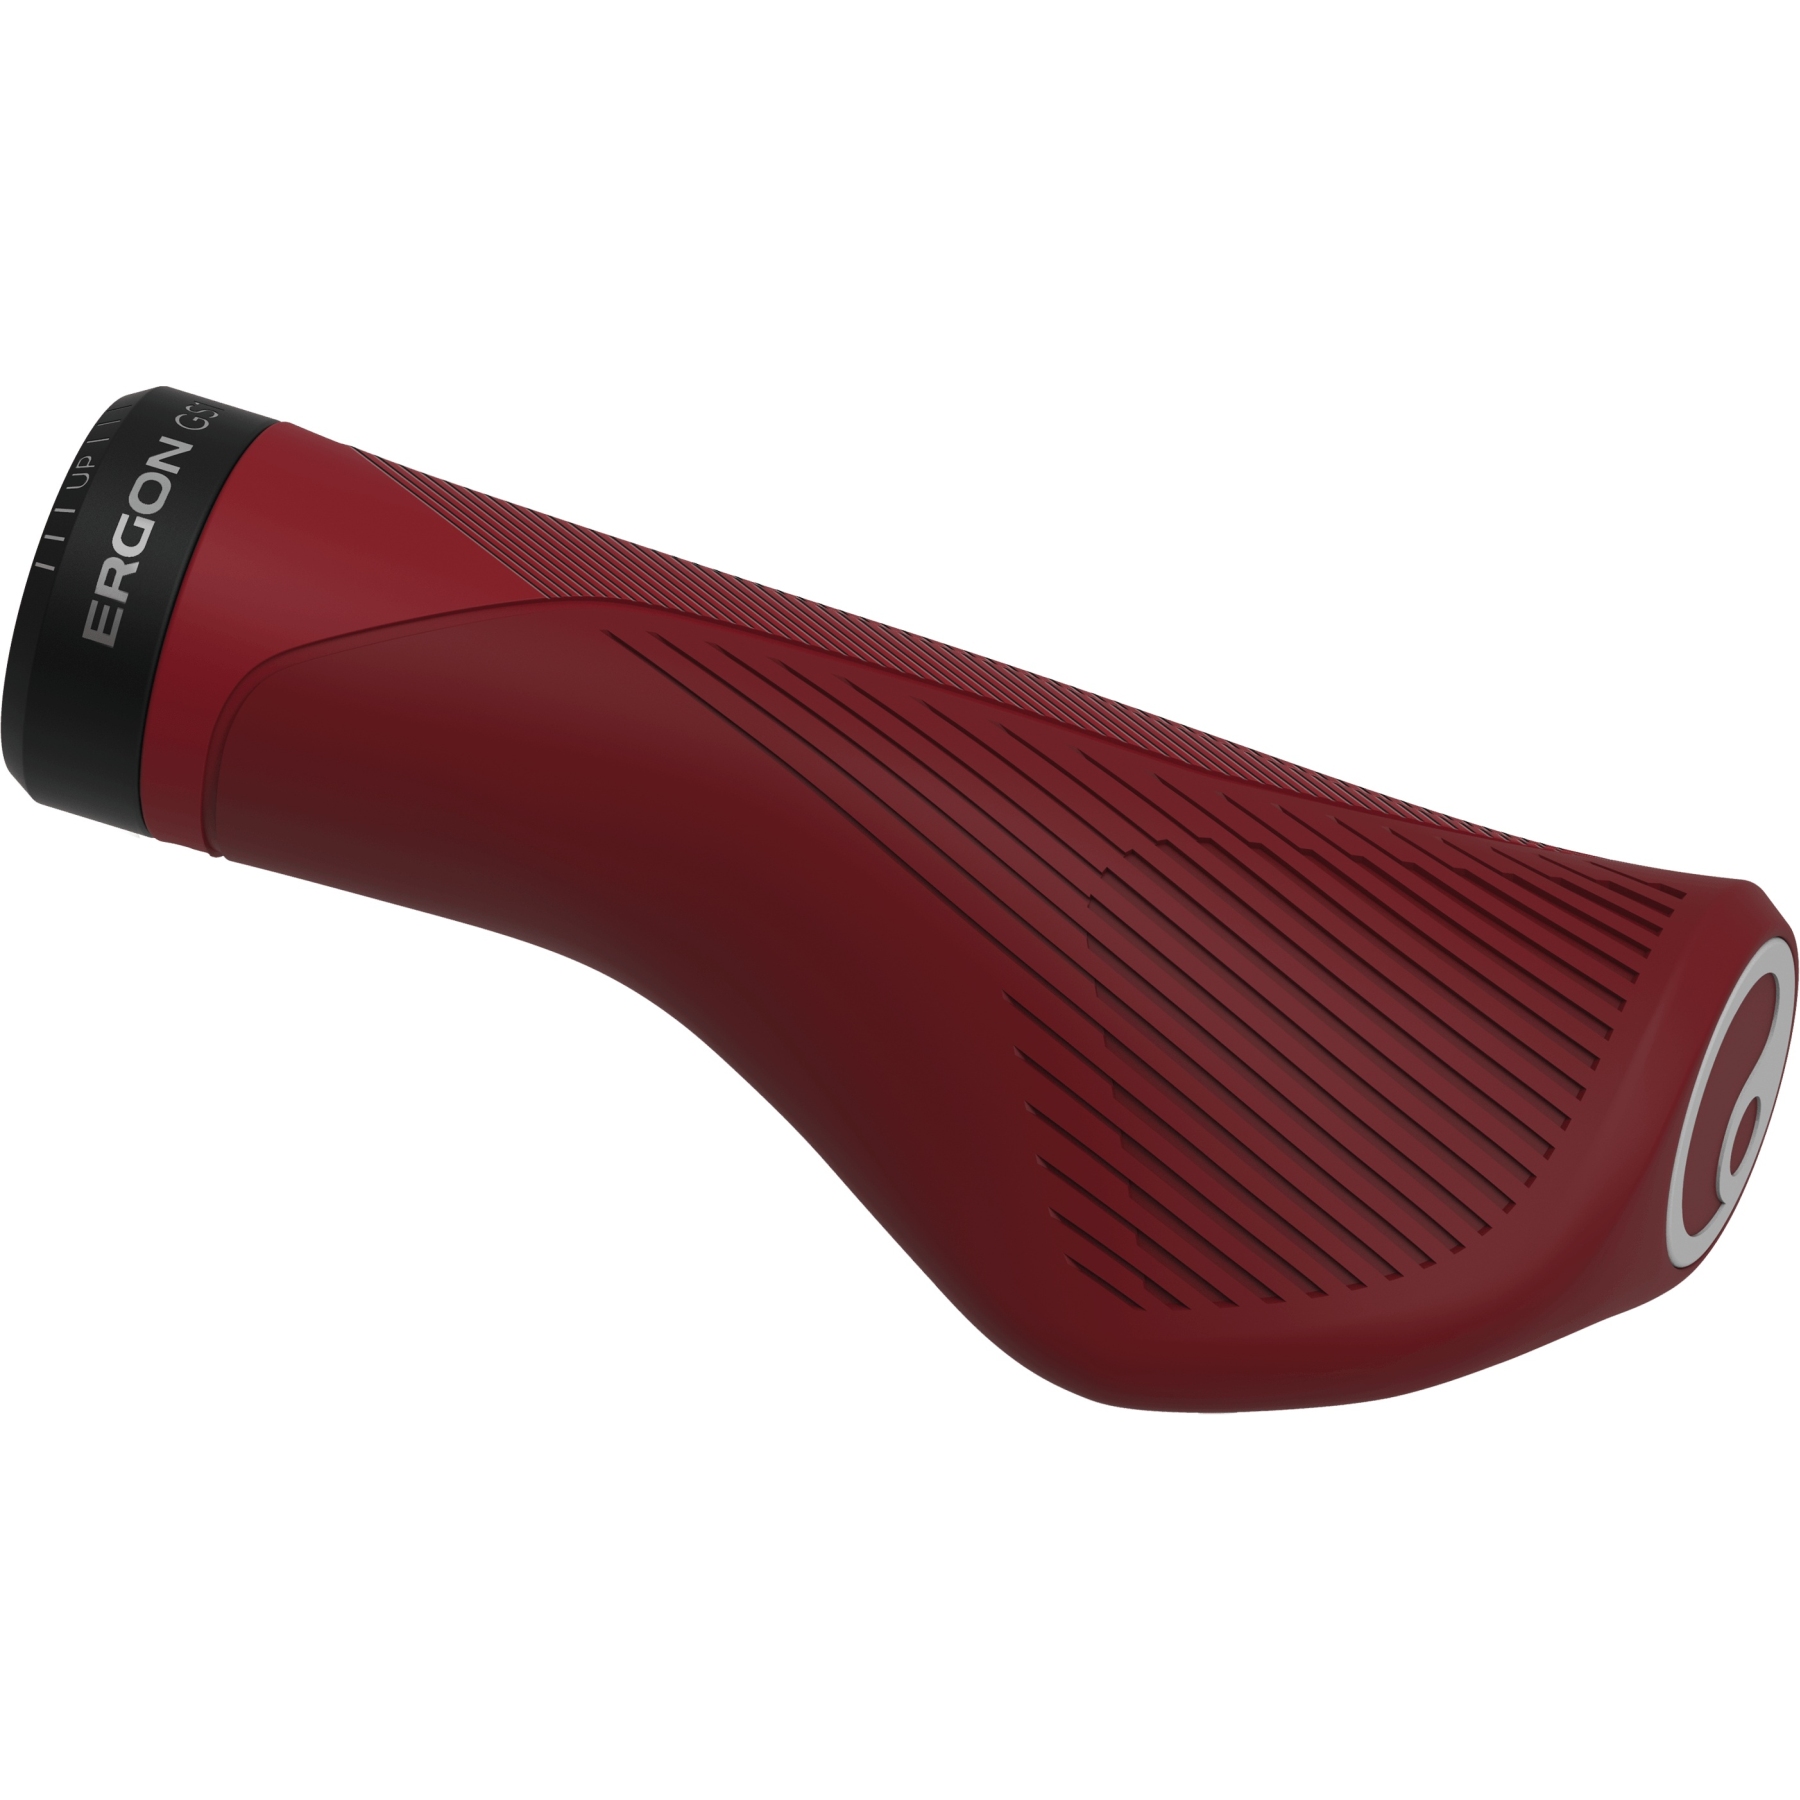 Picture of Ergon GS1 Evo Large Bar Grips - red